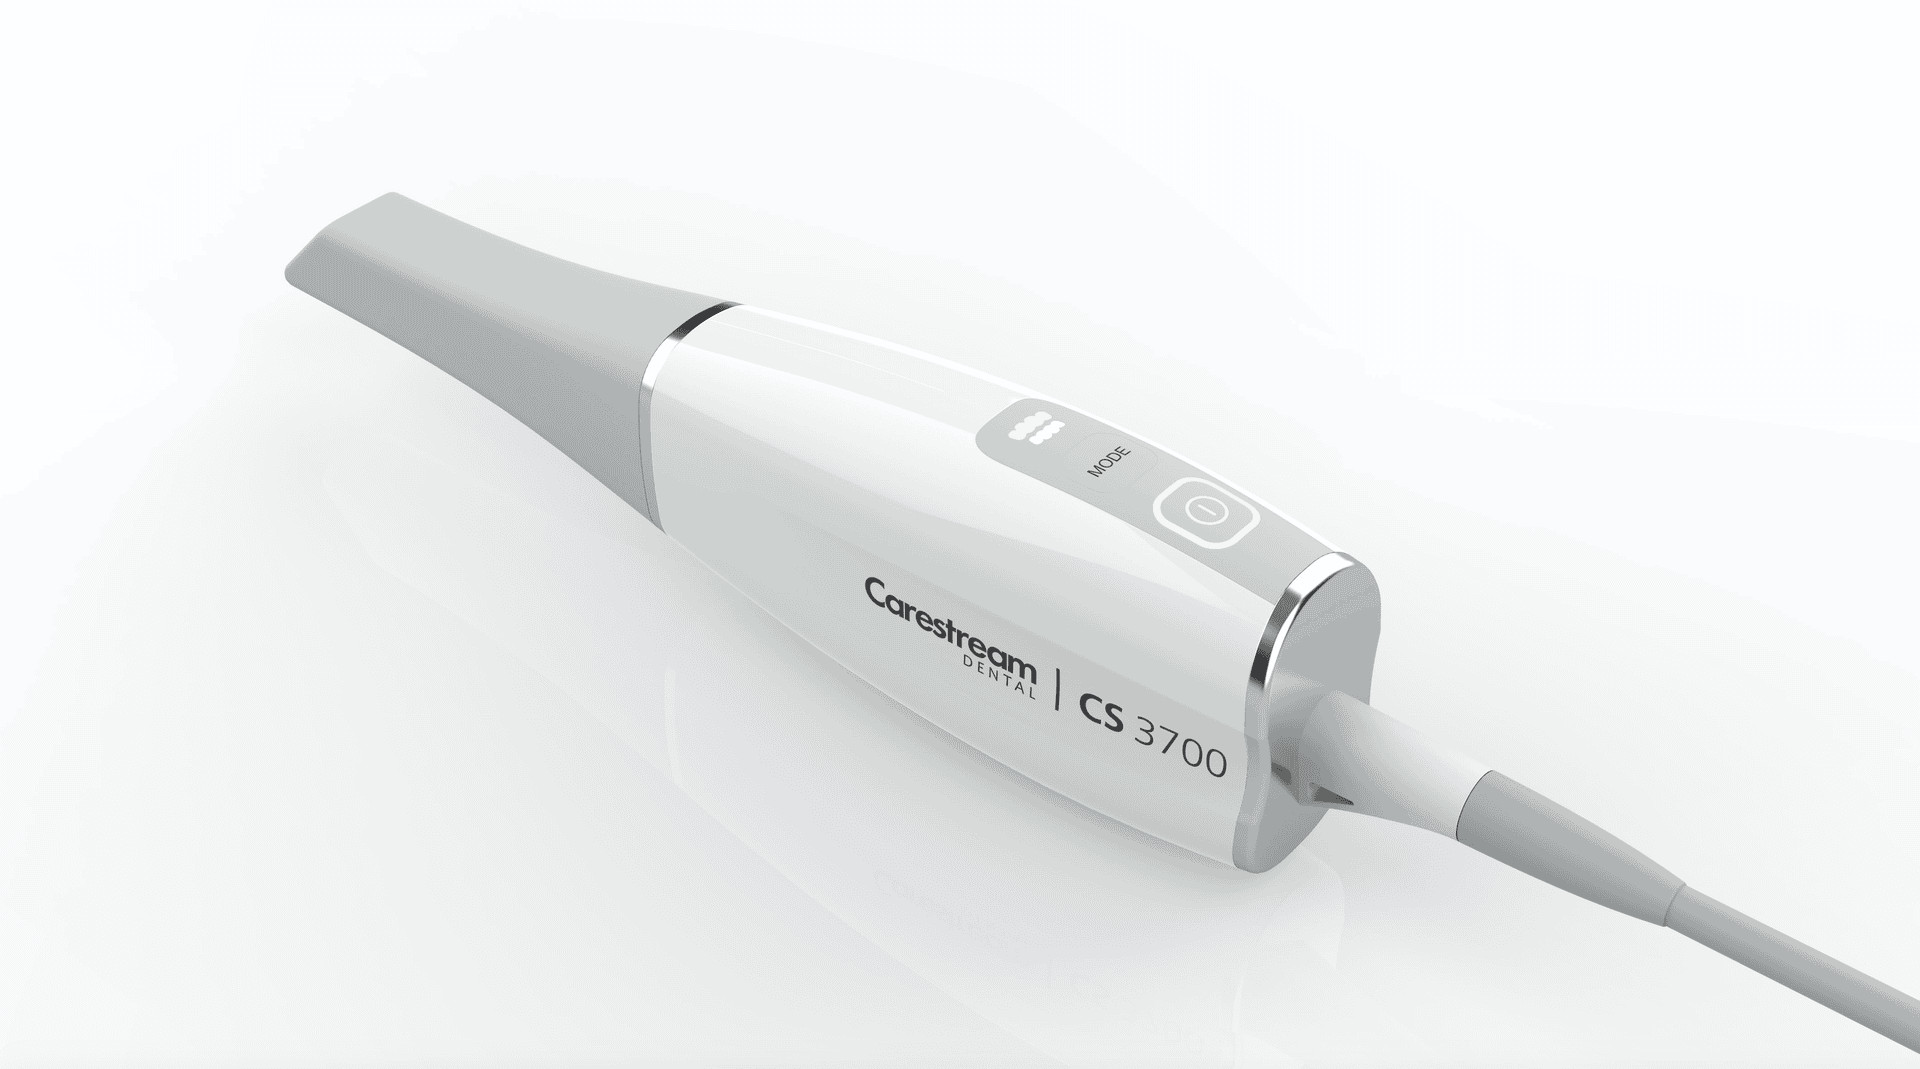 A product image of the sleek white and gray Carestream Dental CS 3700.